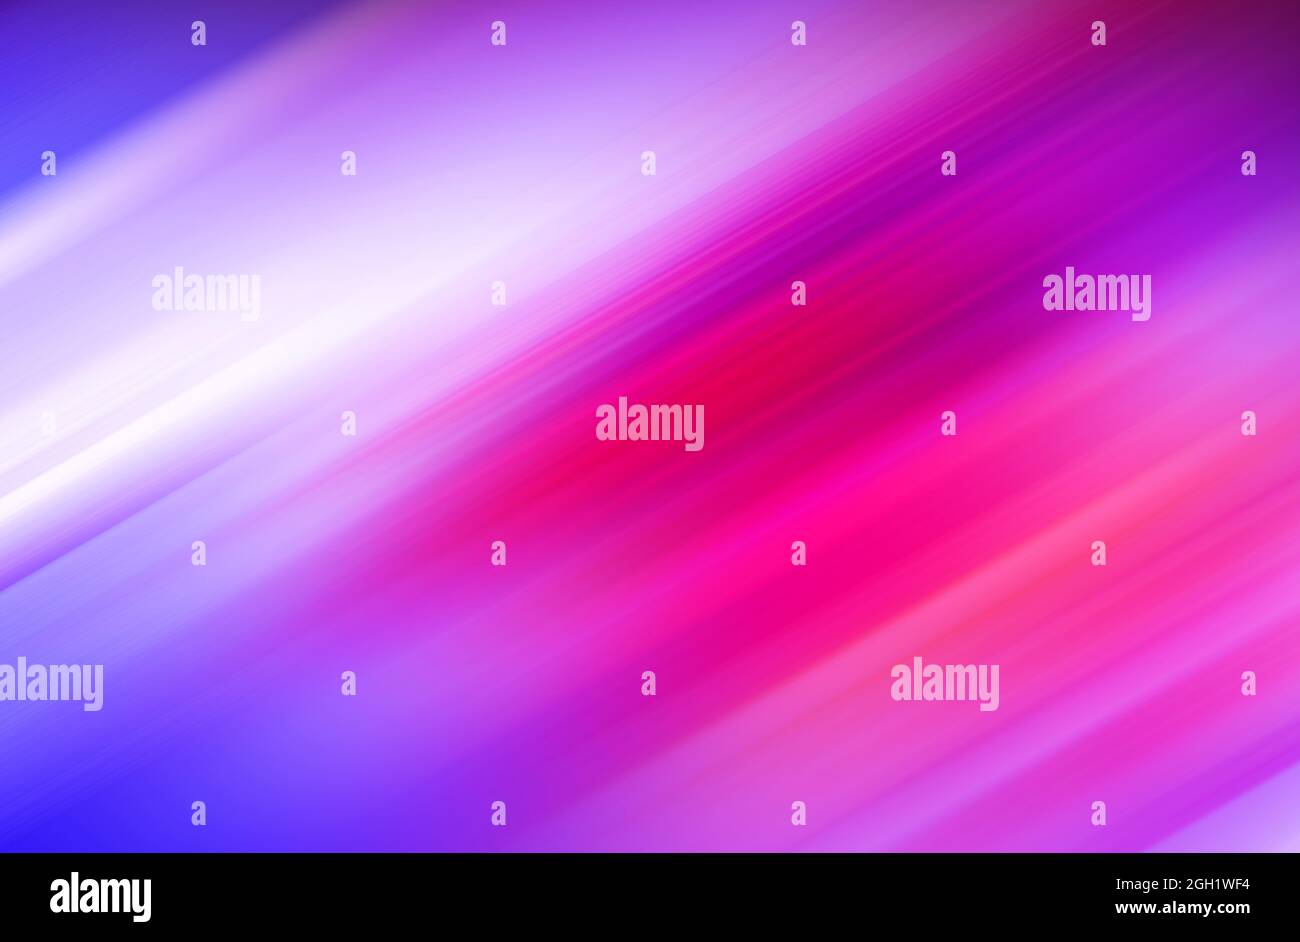 Gradient blurred pink purple slanted lines motion blur abstract background Stock Photo